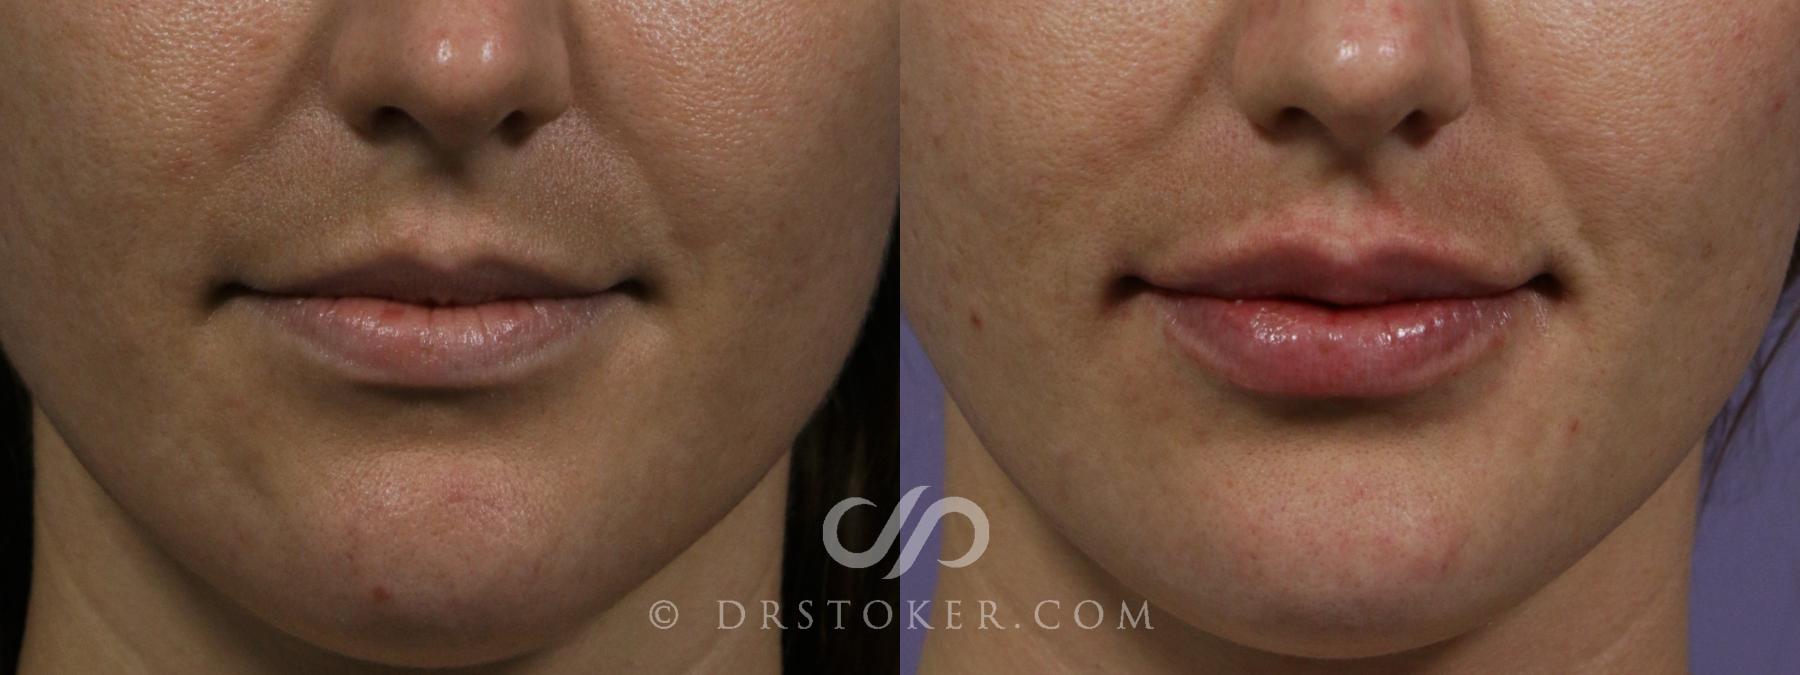 Before & After Lip Fillers/Augmentation Case 1868 Front View in Los Angeles, CA